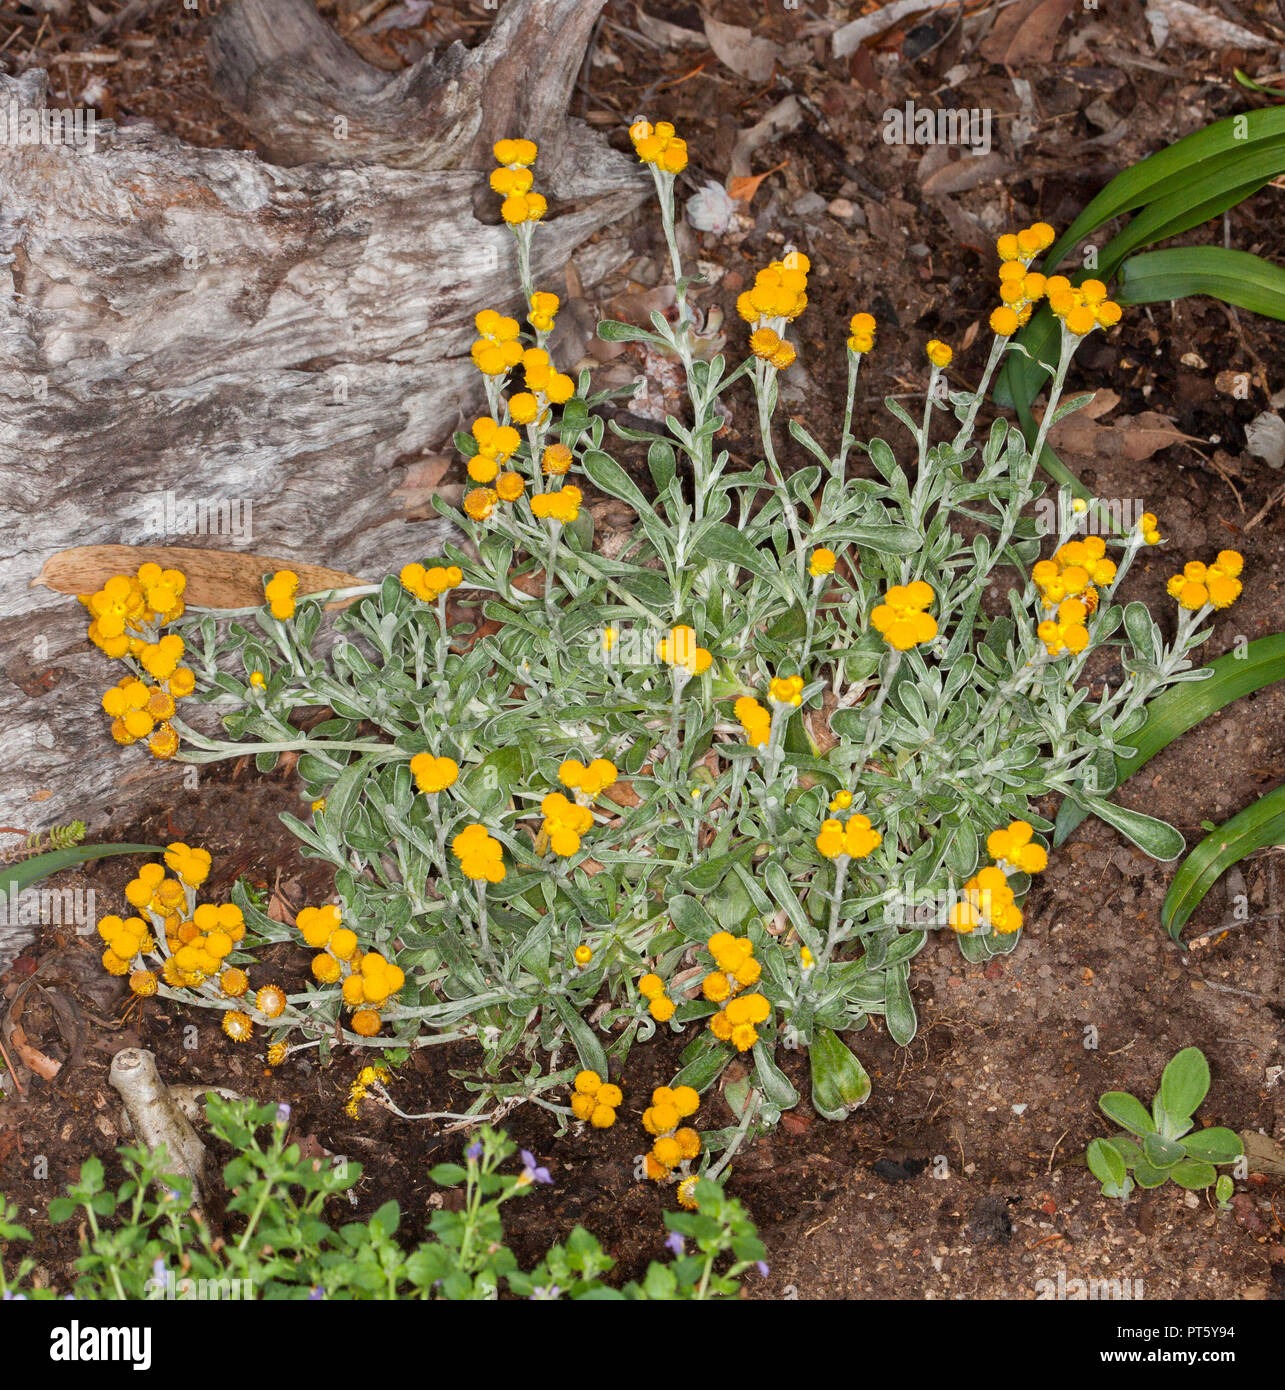 Australian wildflowers, Chrysocephalum apiculatum Desert Flame, drought tolerant native plant cloaked with bright yellow flowers & blue green foliage Stock Photo